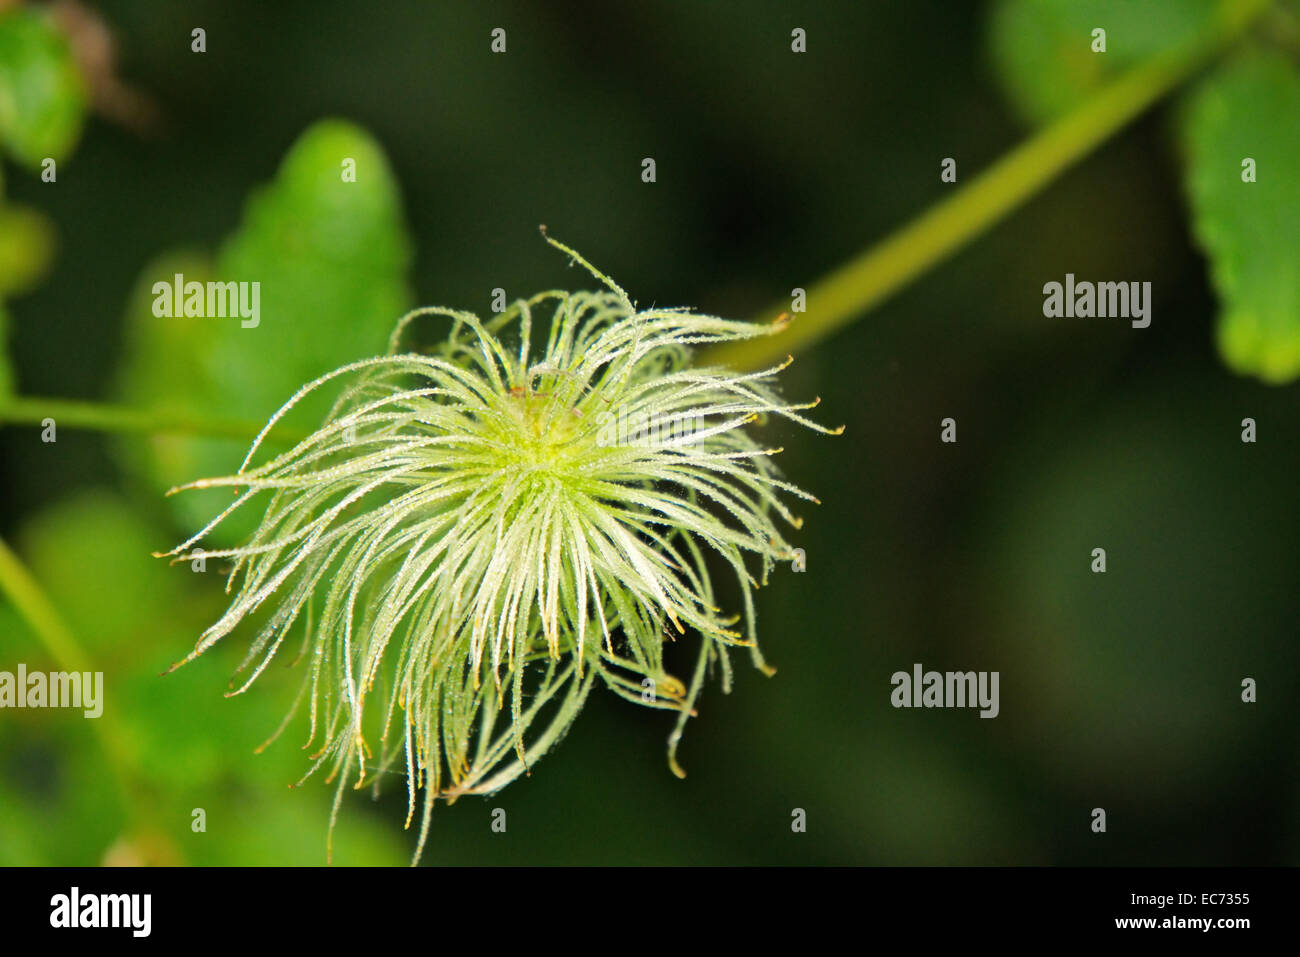 Clematis flower withered Stock Photo